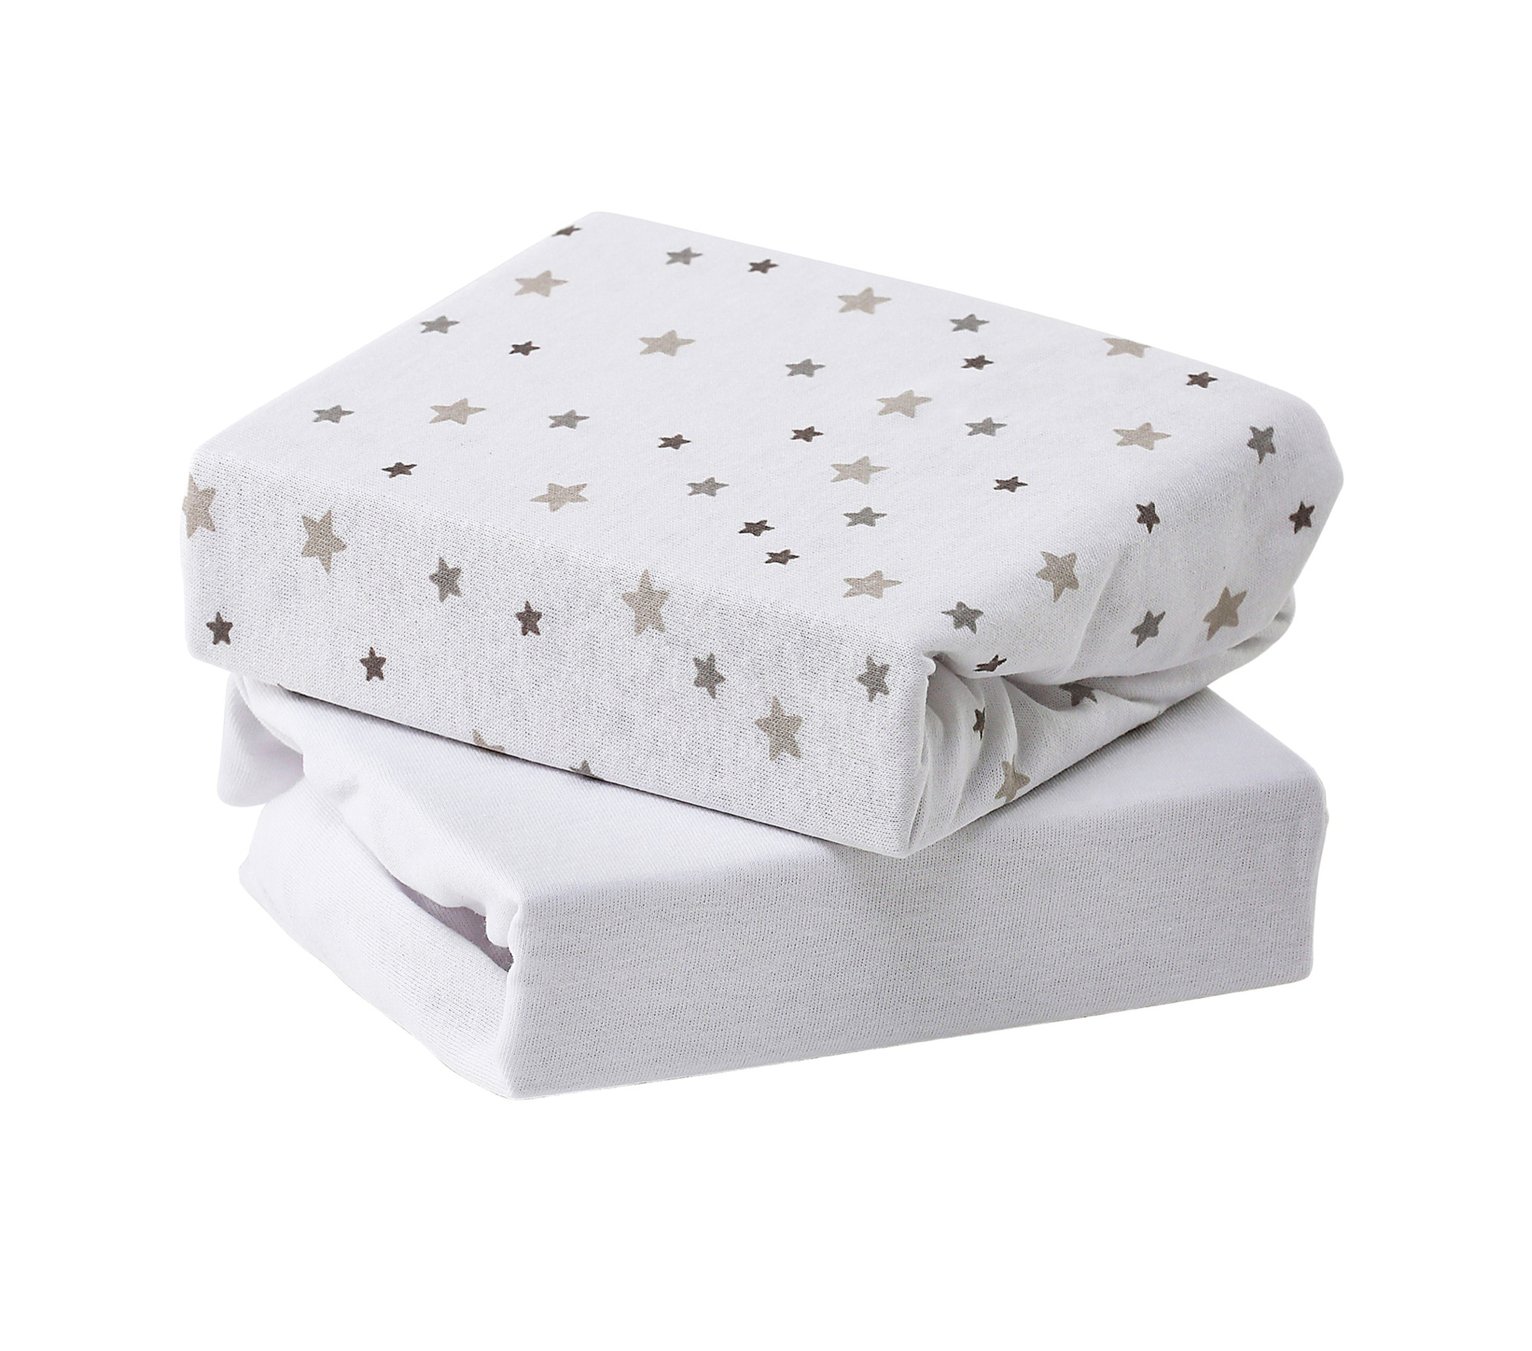 Baby Elegance Cot Bed Jersey Sheets 2 Pack Review